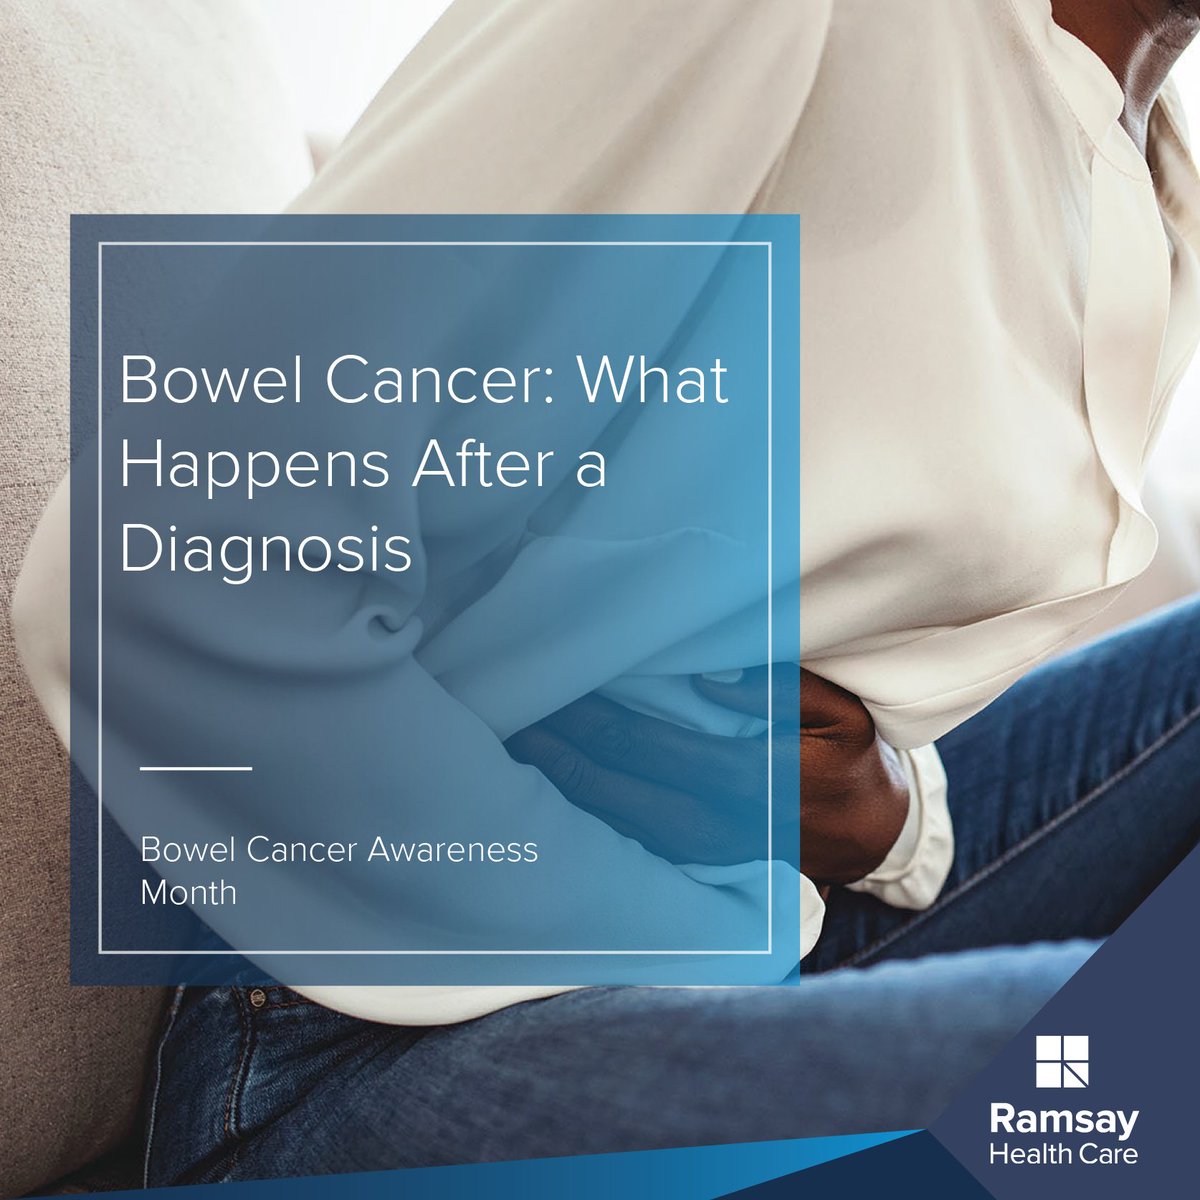 April is #BowelCancerAwarenessMonth, in the UK nearly 43,000 people are diagnosed with bowel cancer every year. The best way to combat bowel cancer is with early diagnosis and treatment. Read our article to find out more: ow.ly/yotM50RmaNq